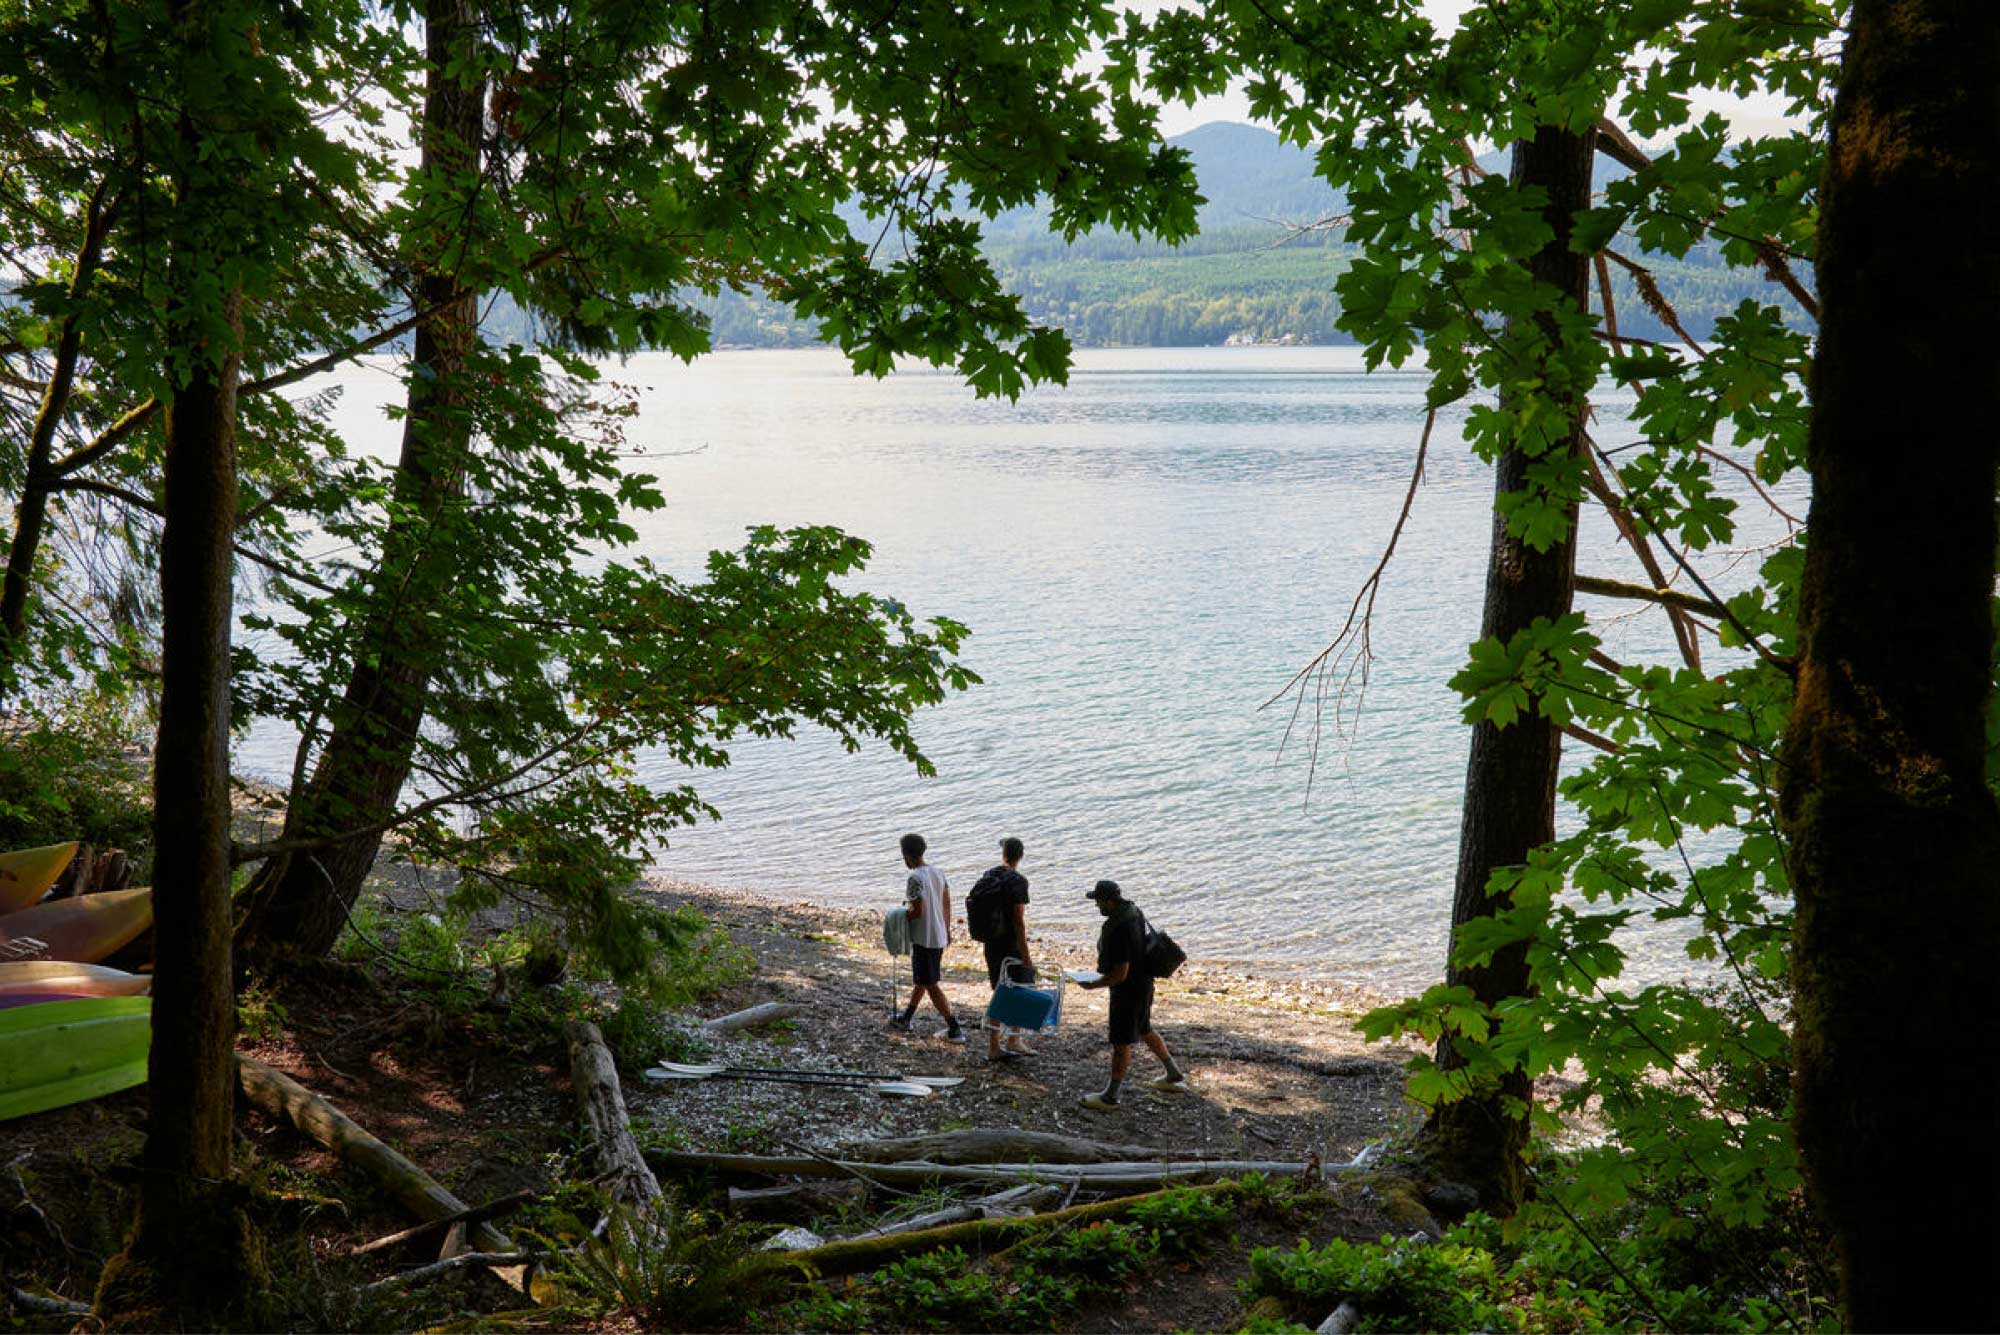 Three people stand in a forest by a body of water, holding towels and folding chairs.